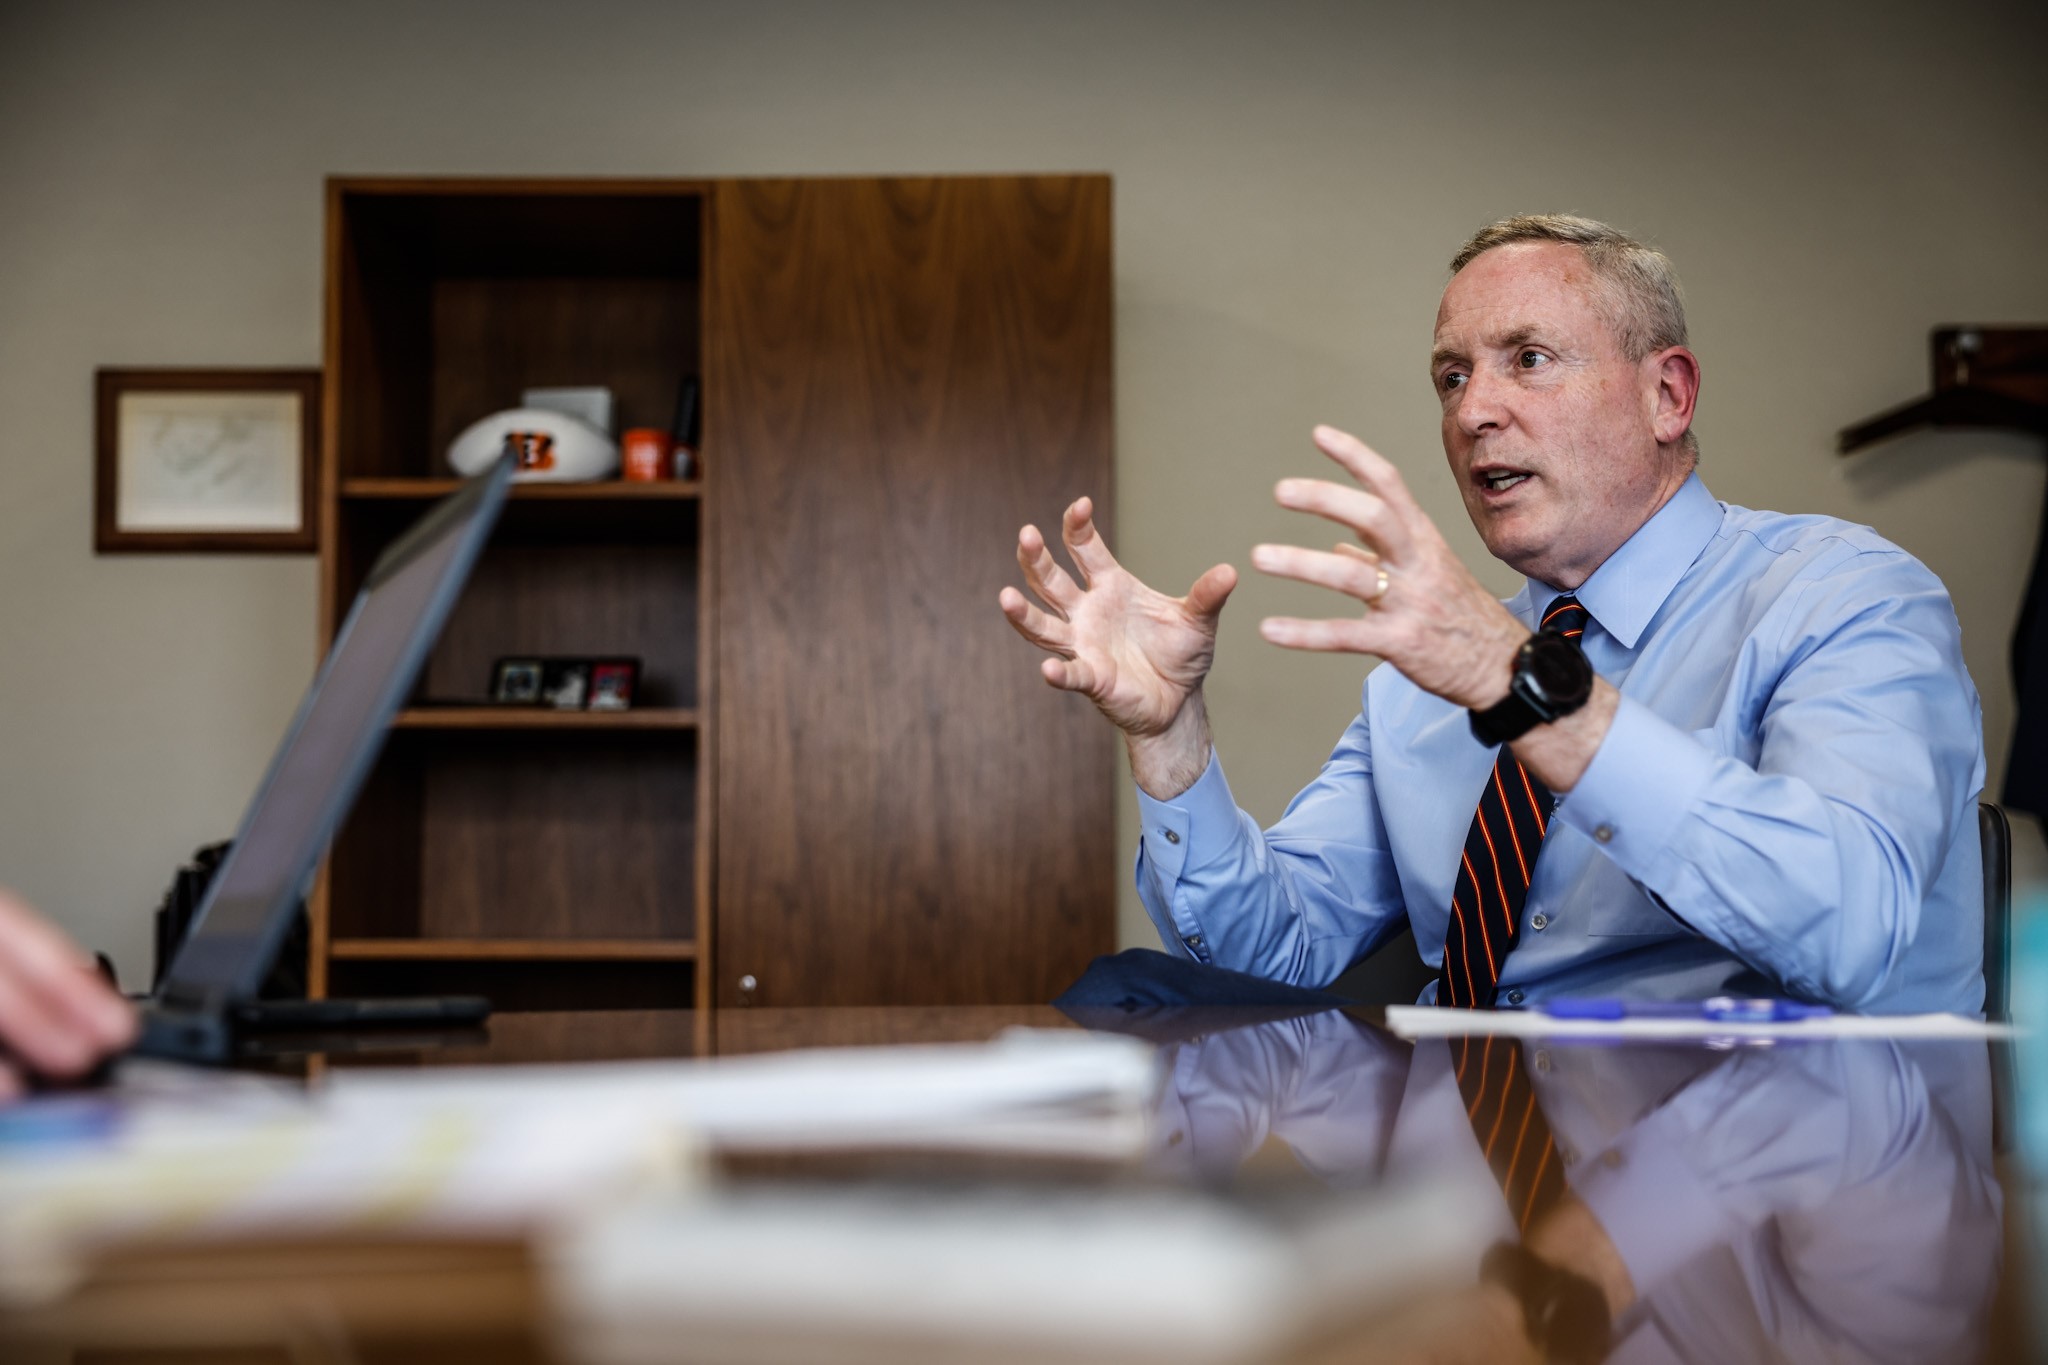 Michael Riordan is the new President & CEO of Premier Health based in Dayton. Riordan sat down with Dayton  Daily News reporter Lynn Hulsey for a Q &A Thursday afternoon May 26, 2022. JIM NOELKER/STAFF